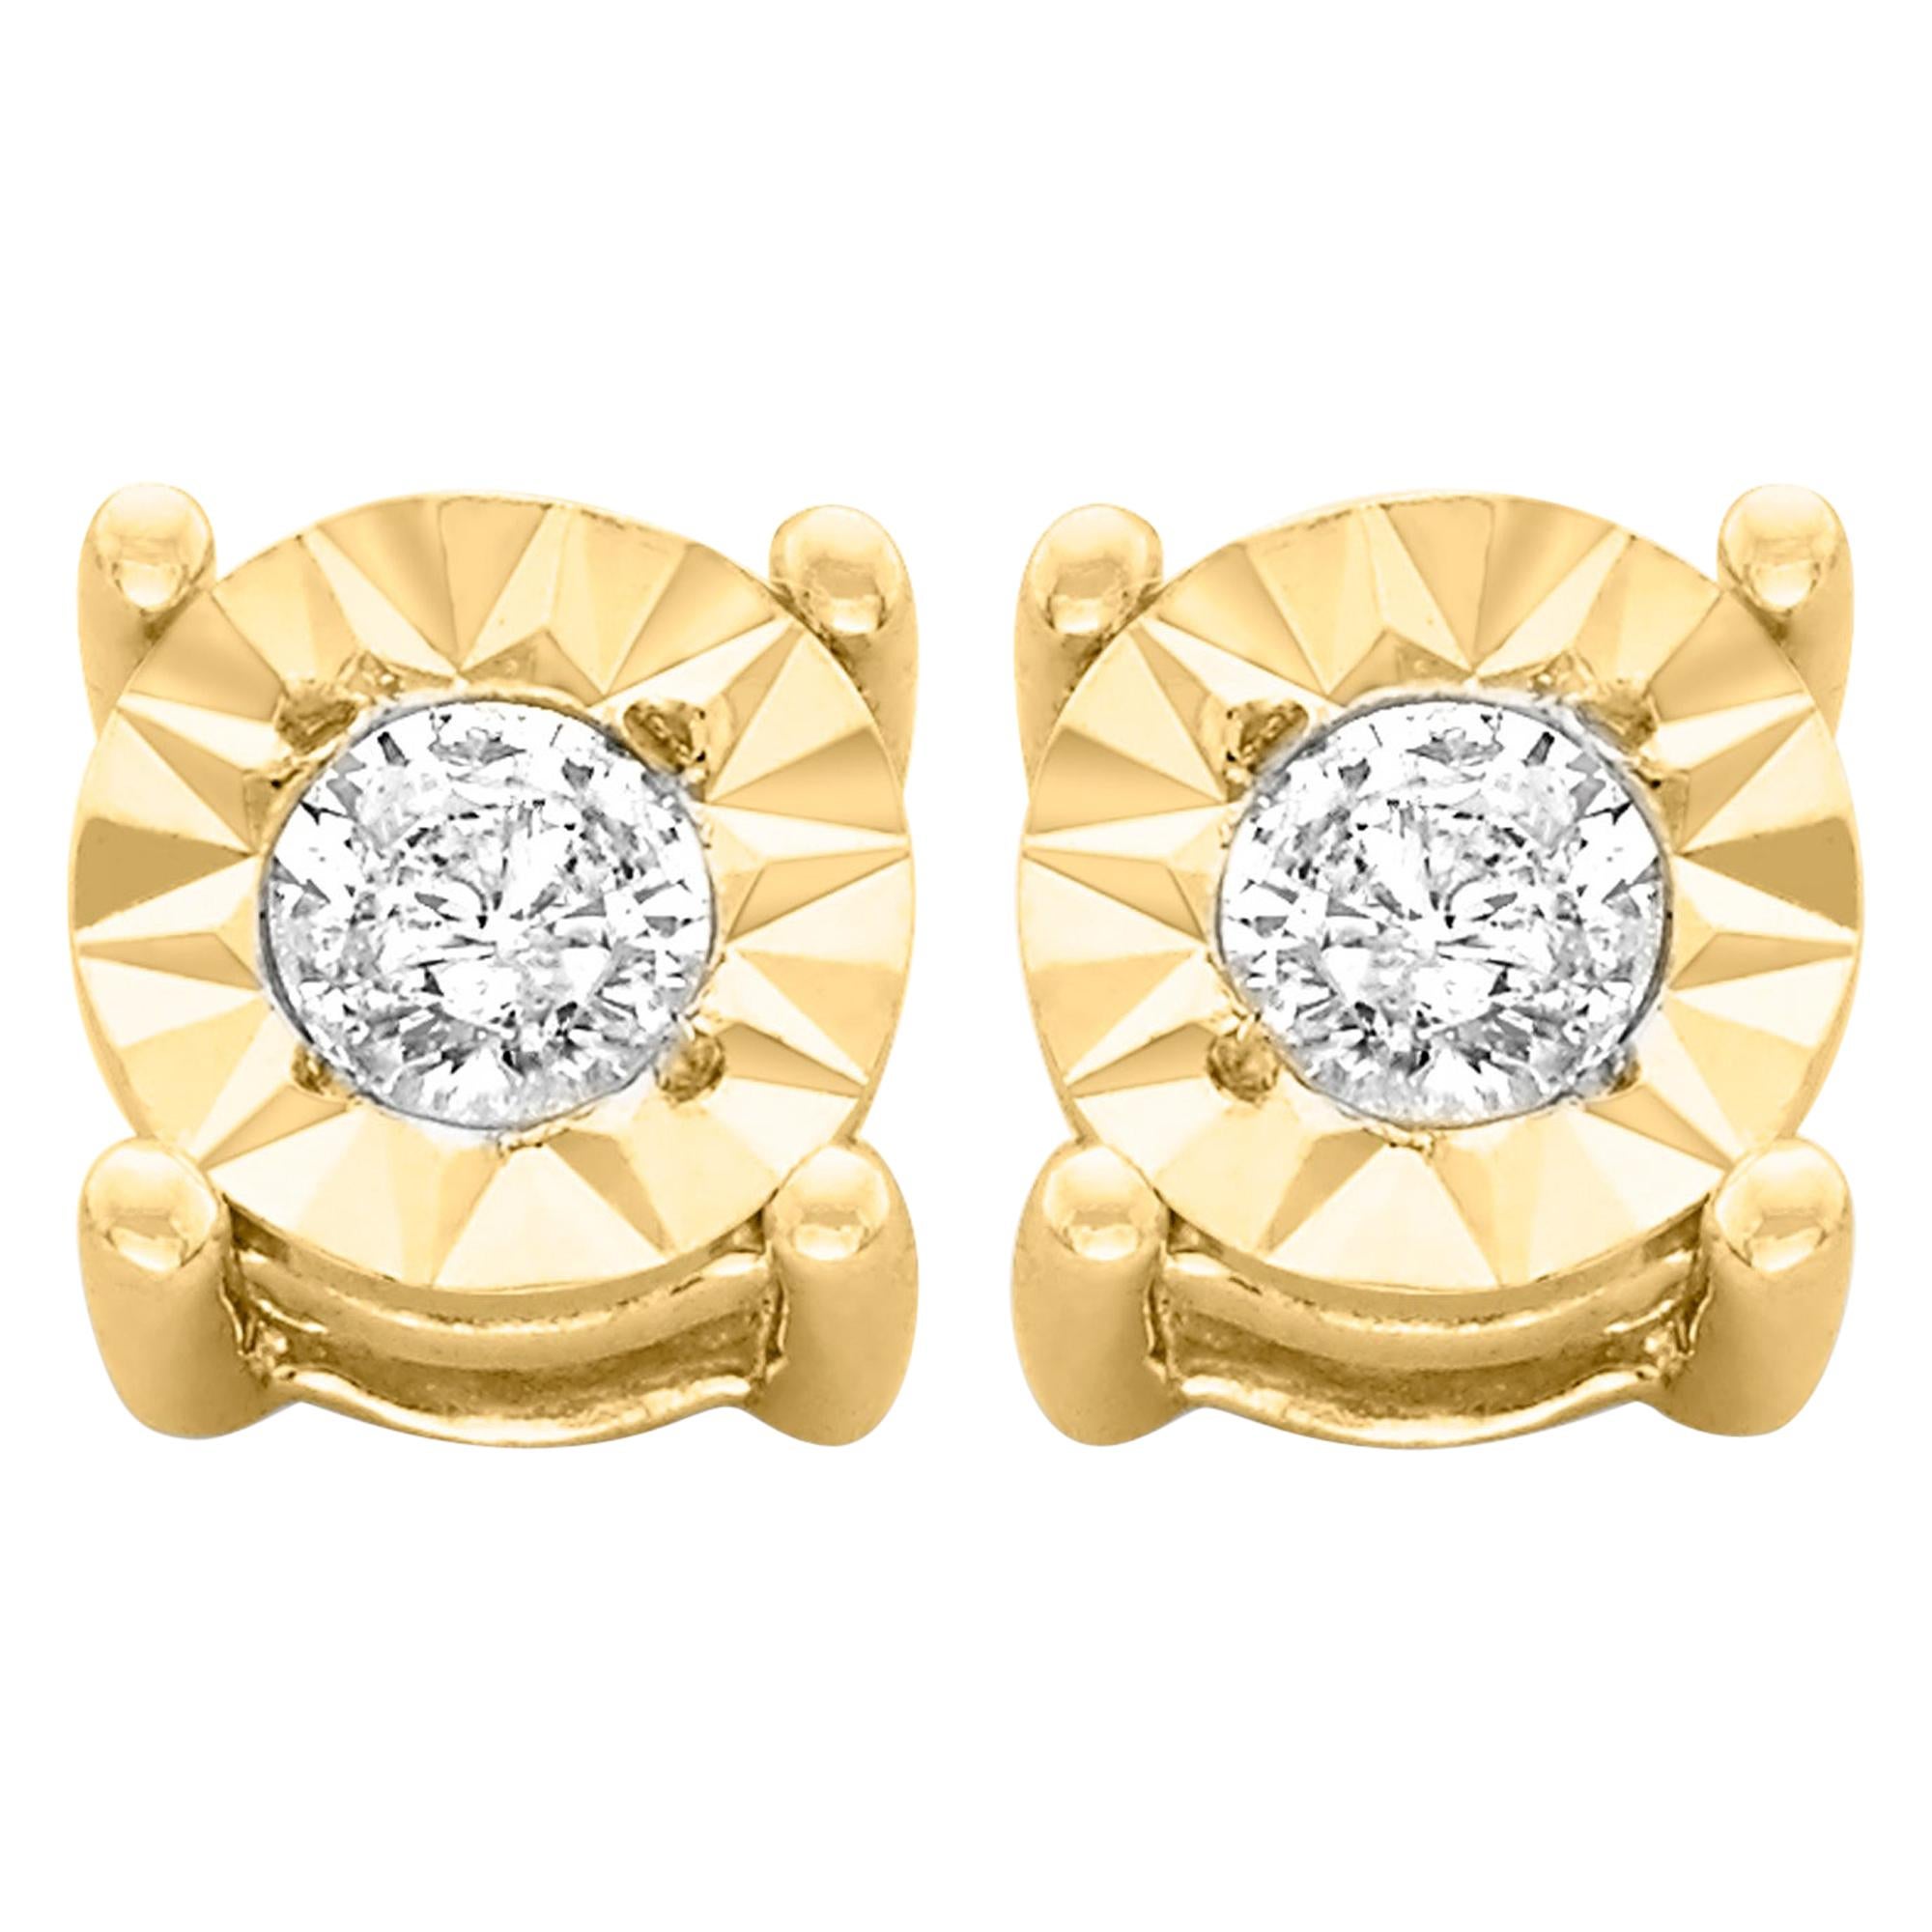 10K Yellow Gold Plated Sterling Silver 1/5 Carat Round-Cut Diamond Stud Earrings For Sale